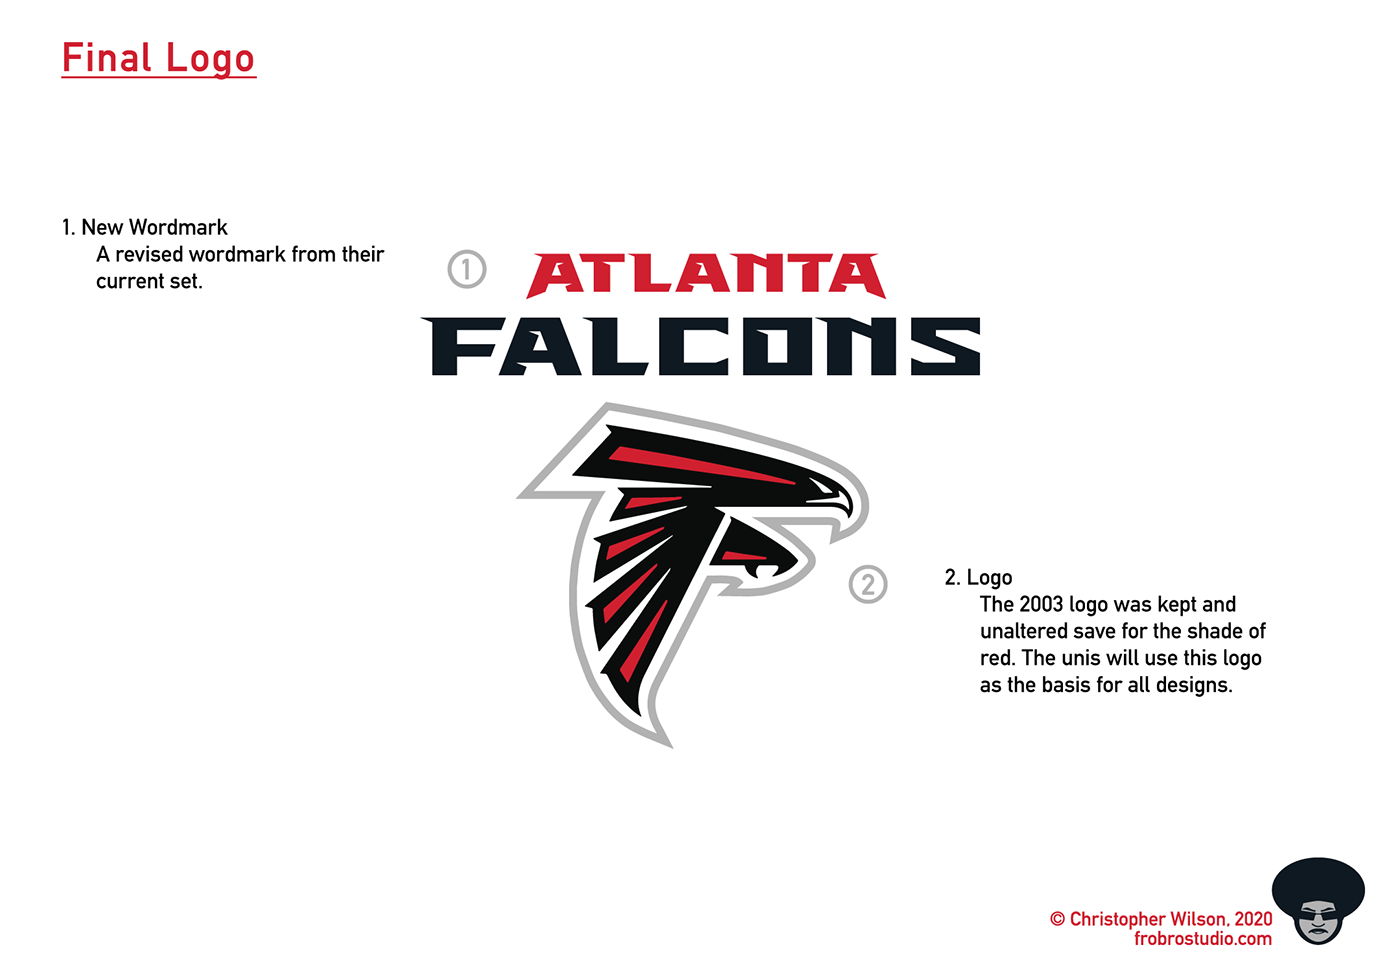 NFL EXPANSION x Viperion101 - Page 3 - Concepts - Chris Creamer's Sports  Logos Community - CCSLC - SportsLogos.Net Forums